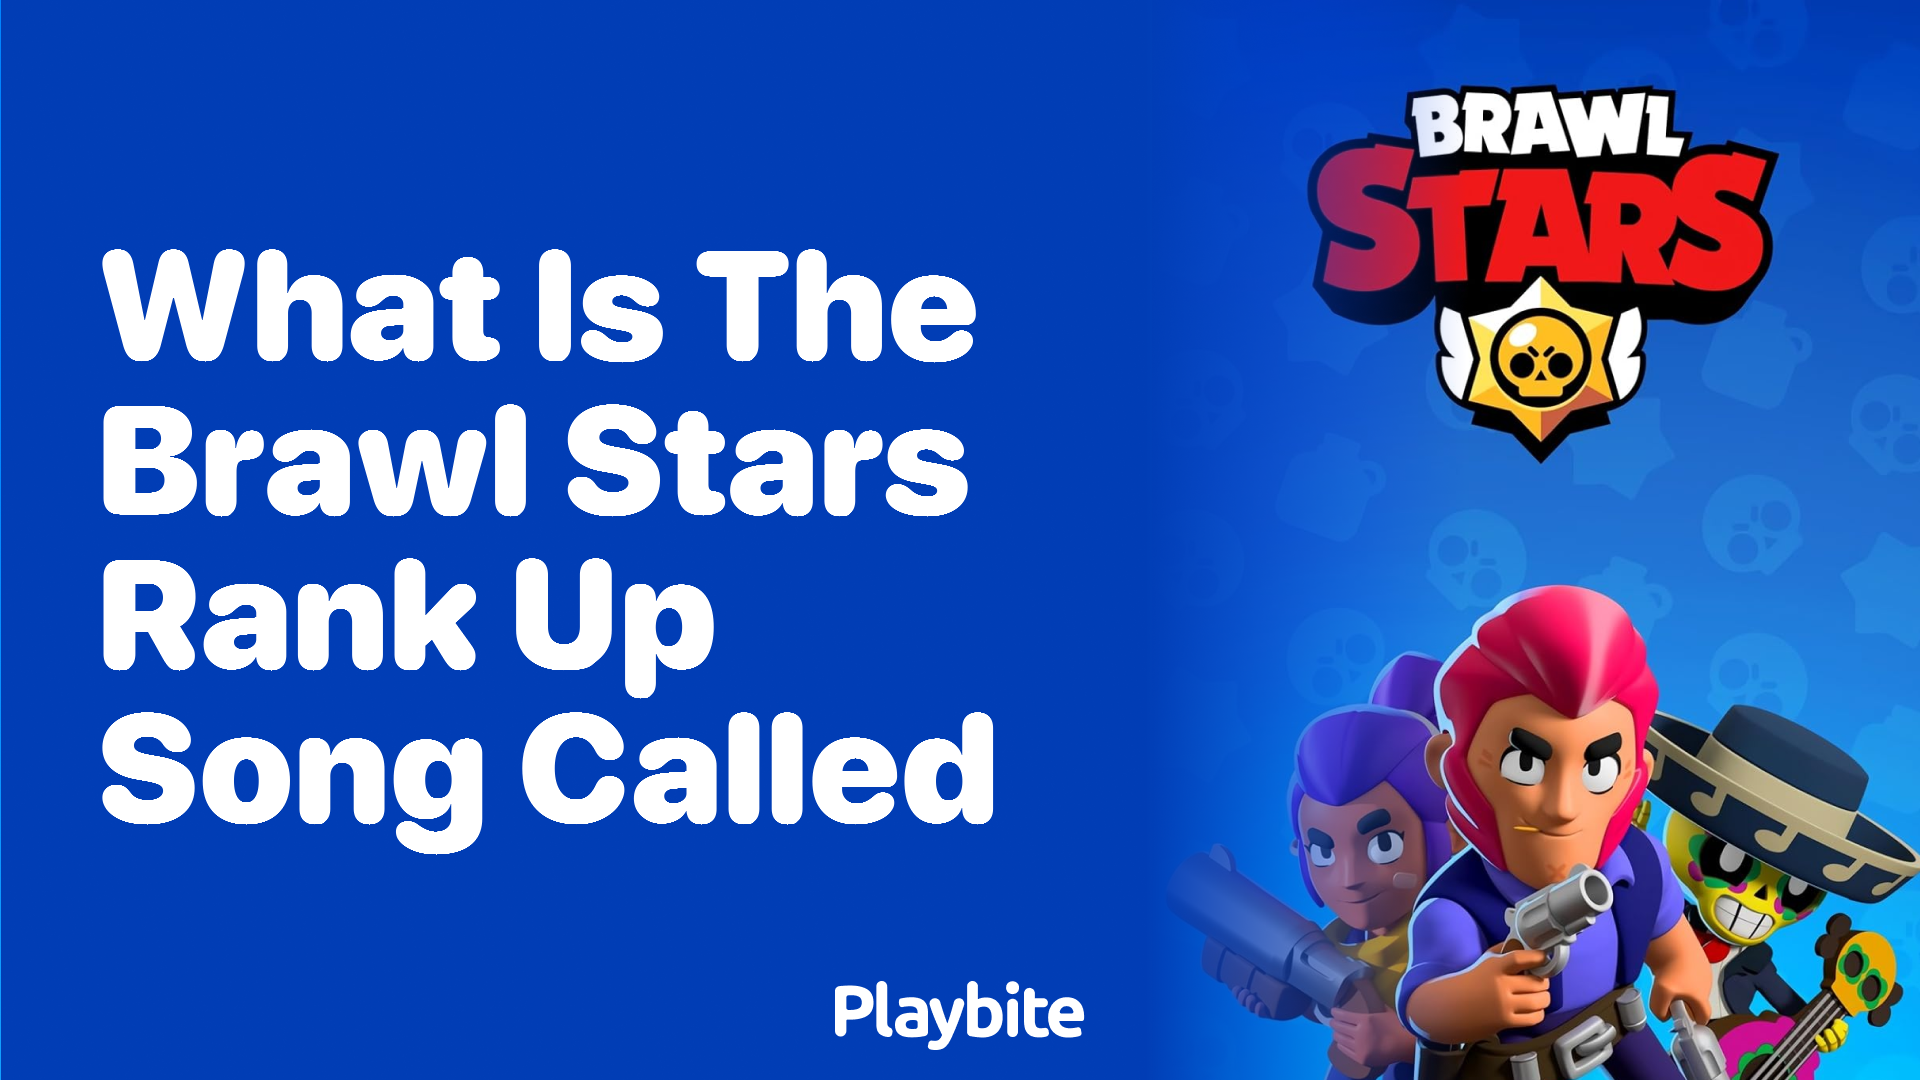 What is the Brawl Stars Rank Up Song Called?